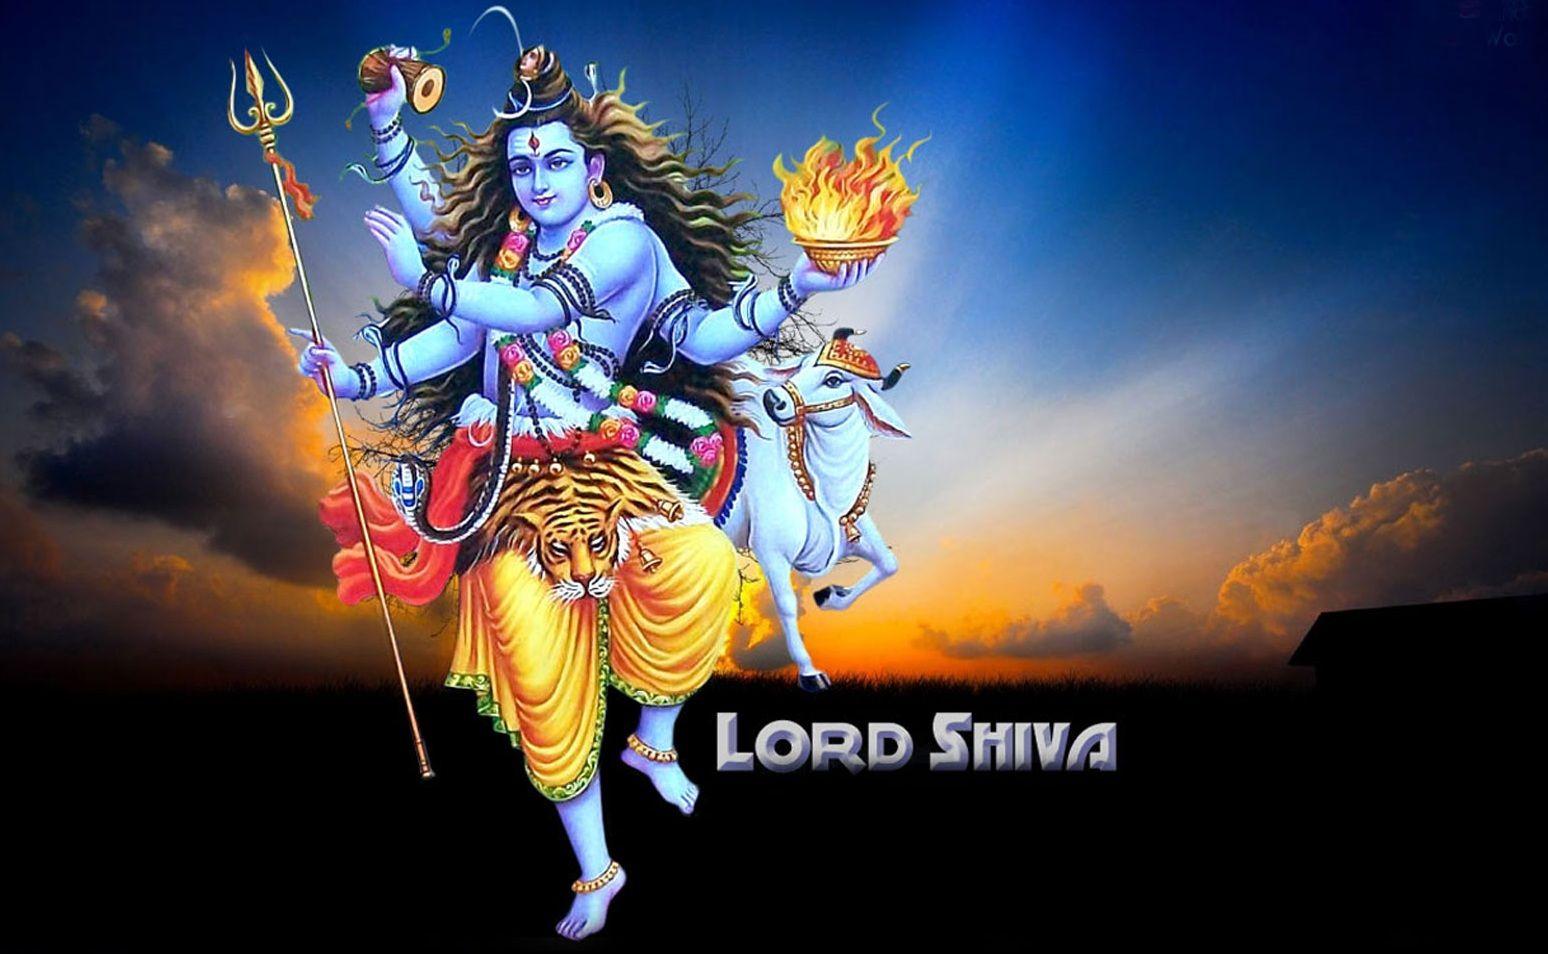 835+ Lord Shiva Image [Wallpapers] & God Shiva Photos in HD Quality